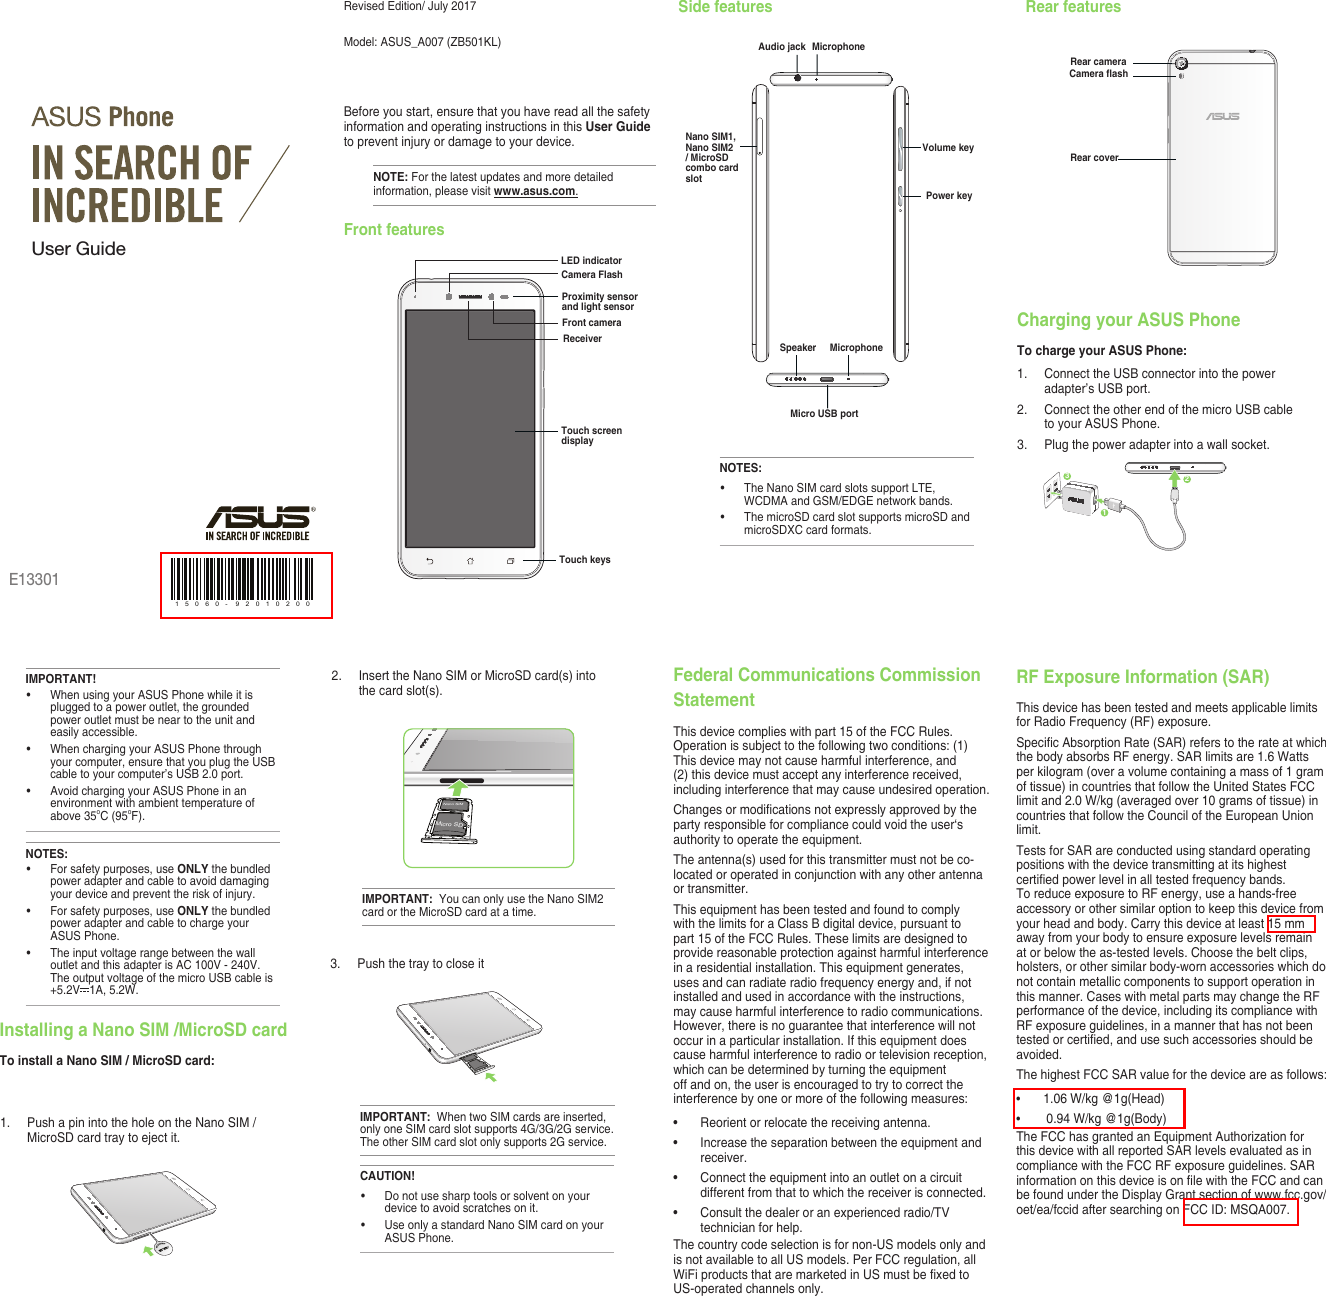 Revised Edition/ July 2017Model:  ASUS_A007 (ZB501KL)Before you start, ensure that you have read all the safety information and operating instructions in this User Guide to prevent injury or damage to your device.NOTE: For the latest updates and more detailed information, please visit www.asus.com.Front featuresSide features Rear featuresE13301User GuideTouch screen displayReceiverTouch keysFront cameraLED indicatorCamera FlashProximity sensor and light sensorPower keyAudio jackMicro USB portMicrophoneVolume keySpeaker MicrophoneNOTES:• TheNanoSIMcardslotssupportLTE,WCDMA and GSM/EDGE network bands. • ThemicroSDcardslotsupportsmicroSDandmicroSDXC card formats.Nano SIM1, Nano SIM2 / MicroSD combo card slotRear cameraCamera ashRear coverCharging your ASUS PhoneTo charge your ASUS Phone:1.  Connect the USB connector into the power adapter’s USB port.2.  Connect the other end of the micro USB cable to your ASUS Phone. 3.   Plug the power adapter into a wall socket.NOTES:• Forsafetypurposes,useONLY the bundled power adapter and cable to avoid damaging your device and prevent the risk of injury.• Forsafetypurposes,useONLY the bundled power adapter and cable to charge your ASUS Phone.• Theinputvoltagerangebetweenthewalloutlet and this adapter is AC 100V - 240V. TheoutputvoltageofthemicroUSBcableis+5.2V 1A, 5.2W. IMPORTANT!• WhenusingyourASUSPhonewhileitisplugged to a power outlet, the grounded power outlet must be near to the unit and easily accessible.• WhenchargingyourASUSPhonethroughyour computer, ensure that you plug the USB cable to your computer’s USB 2.0 port.• AvoidchargingyourASUSPhoneinanenvironment with ambient temperature of above 35oC (95oF). 312Installing a Nano SIM /MicroSD cardTo install a Nano SIM / MicroSD card:1. PushapinintotheholeontheNanoSIM/MicroSD card tray to eject it.2. InserttheNanoSIMorMicroSDcard(s)intothe card slot(s).Micro SDNano SIMIMPORTANT:  YoucanonlyusetheNanoSIM2card or the MicroSD card at a time.CAUTION!• Donotusesharptoolsorsolventonyourdevice to avoid scratches on it. • UseonlyastandardNanoSIMcardonyourASUS Phone. 3.  Push the tray to close itIMPORTANT:  WhentwoSIMcardsareinserted,onlyoneSIMcardslotsupports4G/3G/2Gservice.TheotherSIMcardslotonlysupports2Gservice.1 5 0 6 0 - 9 2 0 1 0 2 0 0Federal Communications Commission StatementThisdevicecomplieswithpart15oftheFCCRules.Operation is subject to the following two conditions: (1) Thisdevicemaynotcauseharmfulinterference,and(2) this device must accept any interference received, including interference that may cause undesired operation.Changesormodicationsnotexpresslyapprovedbytheparty responsible for compliance could void the user‘s authority to operate the equipment.Theantenna(s)usedforthistransmittermustnotbeco-located or operated in conjunction with any other antenna or transmitter.Thisequipmenthasbeentestedandfoundtocomplywith the limits for a Class B digital device, pursuant to part15oftheFCCRules.Theselimitsaredesignedtoprovide reasonable protection against harmful interference inaresidentialinstallation.Thisequipmentgenerates,uses and can radiate radio frequency energy and, if not installed and used in accordance with the instructions, may cause harmful interference to radio communications. However, there is no guarantee that interference will not occurinaparticularinstallation.Ifthisequipmentdoescause harmful interference to radio or television reception, which can be determined by turning the equipment off and on, the user is encouraged to try to correct the interference by one or more of the following measures:• Reorientorrelocatethereceivingantenna.• Increasetheseparationbetweentheequipmentandreceiver.• Connecttheequipmentintoanoutletonacircuitdifferent from that to which the receiver is connected.• Consultthedealeroranexperiencedradio/TVtechnician for help.Thecountrycodeselectionisfornon-USmodelsonlyandis not available to all US models. Per FCC regulation, all WiFiproductsthataremarketedinUSmustbexedtoUS-operated channels only. RF Exposure Information (SAR)ThisdevicehasbeentestedandmeetsapplicablelimitsforRadioFrequency(RF)exposure.SpecicAbsorptionRate(SAR)referstotherateatwhichthe body absorbs RF energy. SAR limits are 1.6 Watts per kilogram (over a volume containing a mass of 1 gram of tissue) in countries that follow the United States FCC limit and 2.0 W/kg (averaged over 10 grams of tissue) in countries that follow the Council of the European Union limit.TestsforSARareconductedusingstandardoperatingpositions with the device transmitting at its highest certiedpowerlevelinalltestedfrequencybands.ToreduceexposuretoRFenergy,useahands-freeaccessory or other similar option to keep this device from your head and body. Carry this device at least 15 mm awayfromyourbodytoensureexposurelevelsremainat or below the as-tested levels. Choose the belt clips, holsters, or other similar body-worn accessories which do not contain metallic components to support operation in this manner. Cases with metal parts may change the RF performance of the device, including its compliance with RFexposureguidelines,inamannerthathasnotbeentestedorcertied,andusesuchaccessoriesshouldbeavoided.ThehighestFCCSARvalueforthedeviceareasfollows:• 1.06 W/kg @1g(Head)• 0.94 W/kg @1g(Body)TheFCChasgrantedanEquipmentAuthorizationforthis device with all reported SAR levels evaluated as in compliancewiththeFCCRFexposureguidelines.SARinformationonthisdeviceisonlewiththeFCCandcanbe found under the Display Grant section of www.fcc.gov/oet/ea/fccidaftersearchingonFCCID:MSQA007.